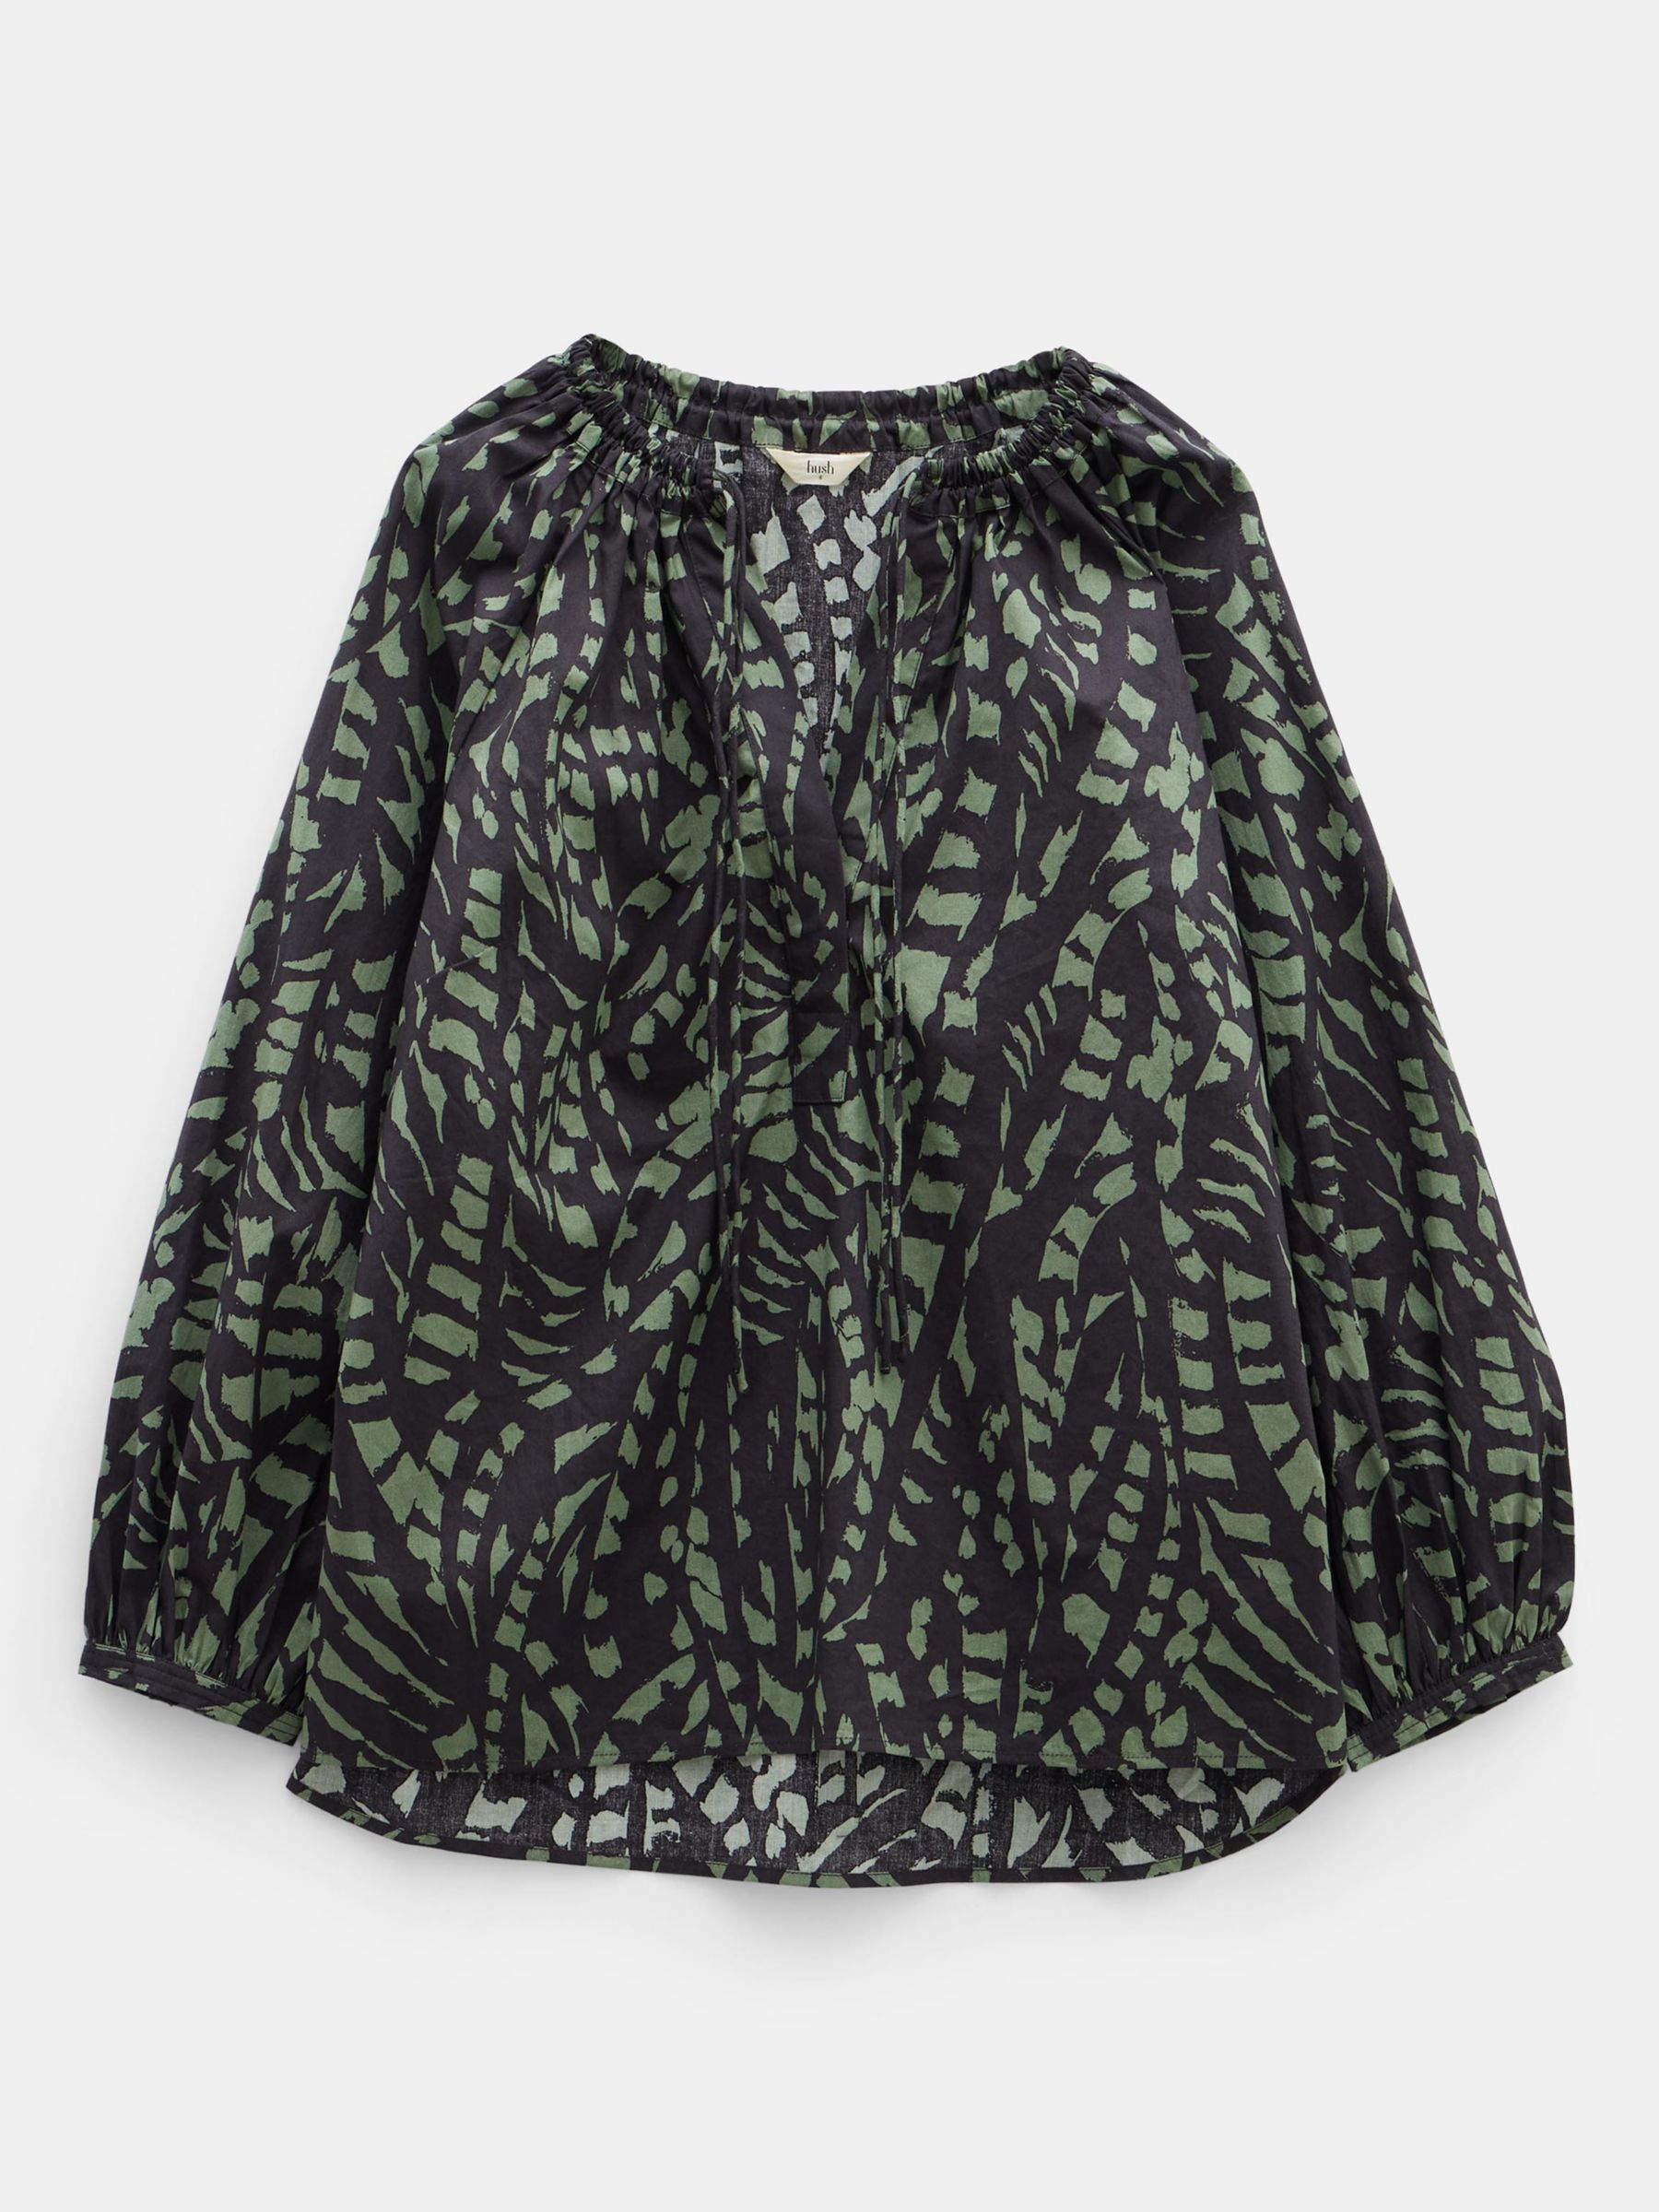 Buy HUSH Monika Cotton Tie Blouse, Abstract Boho Charcoal Online at johnlewis.com